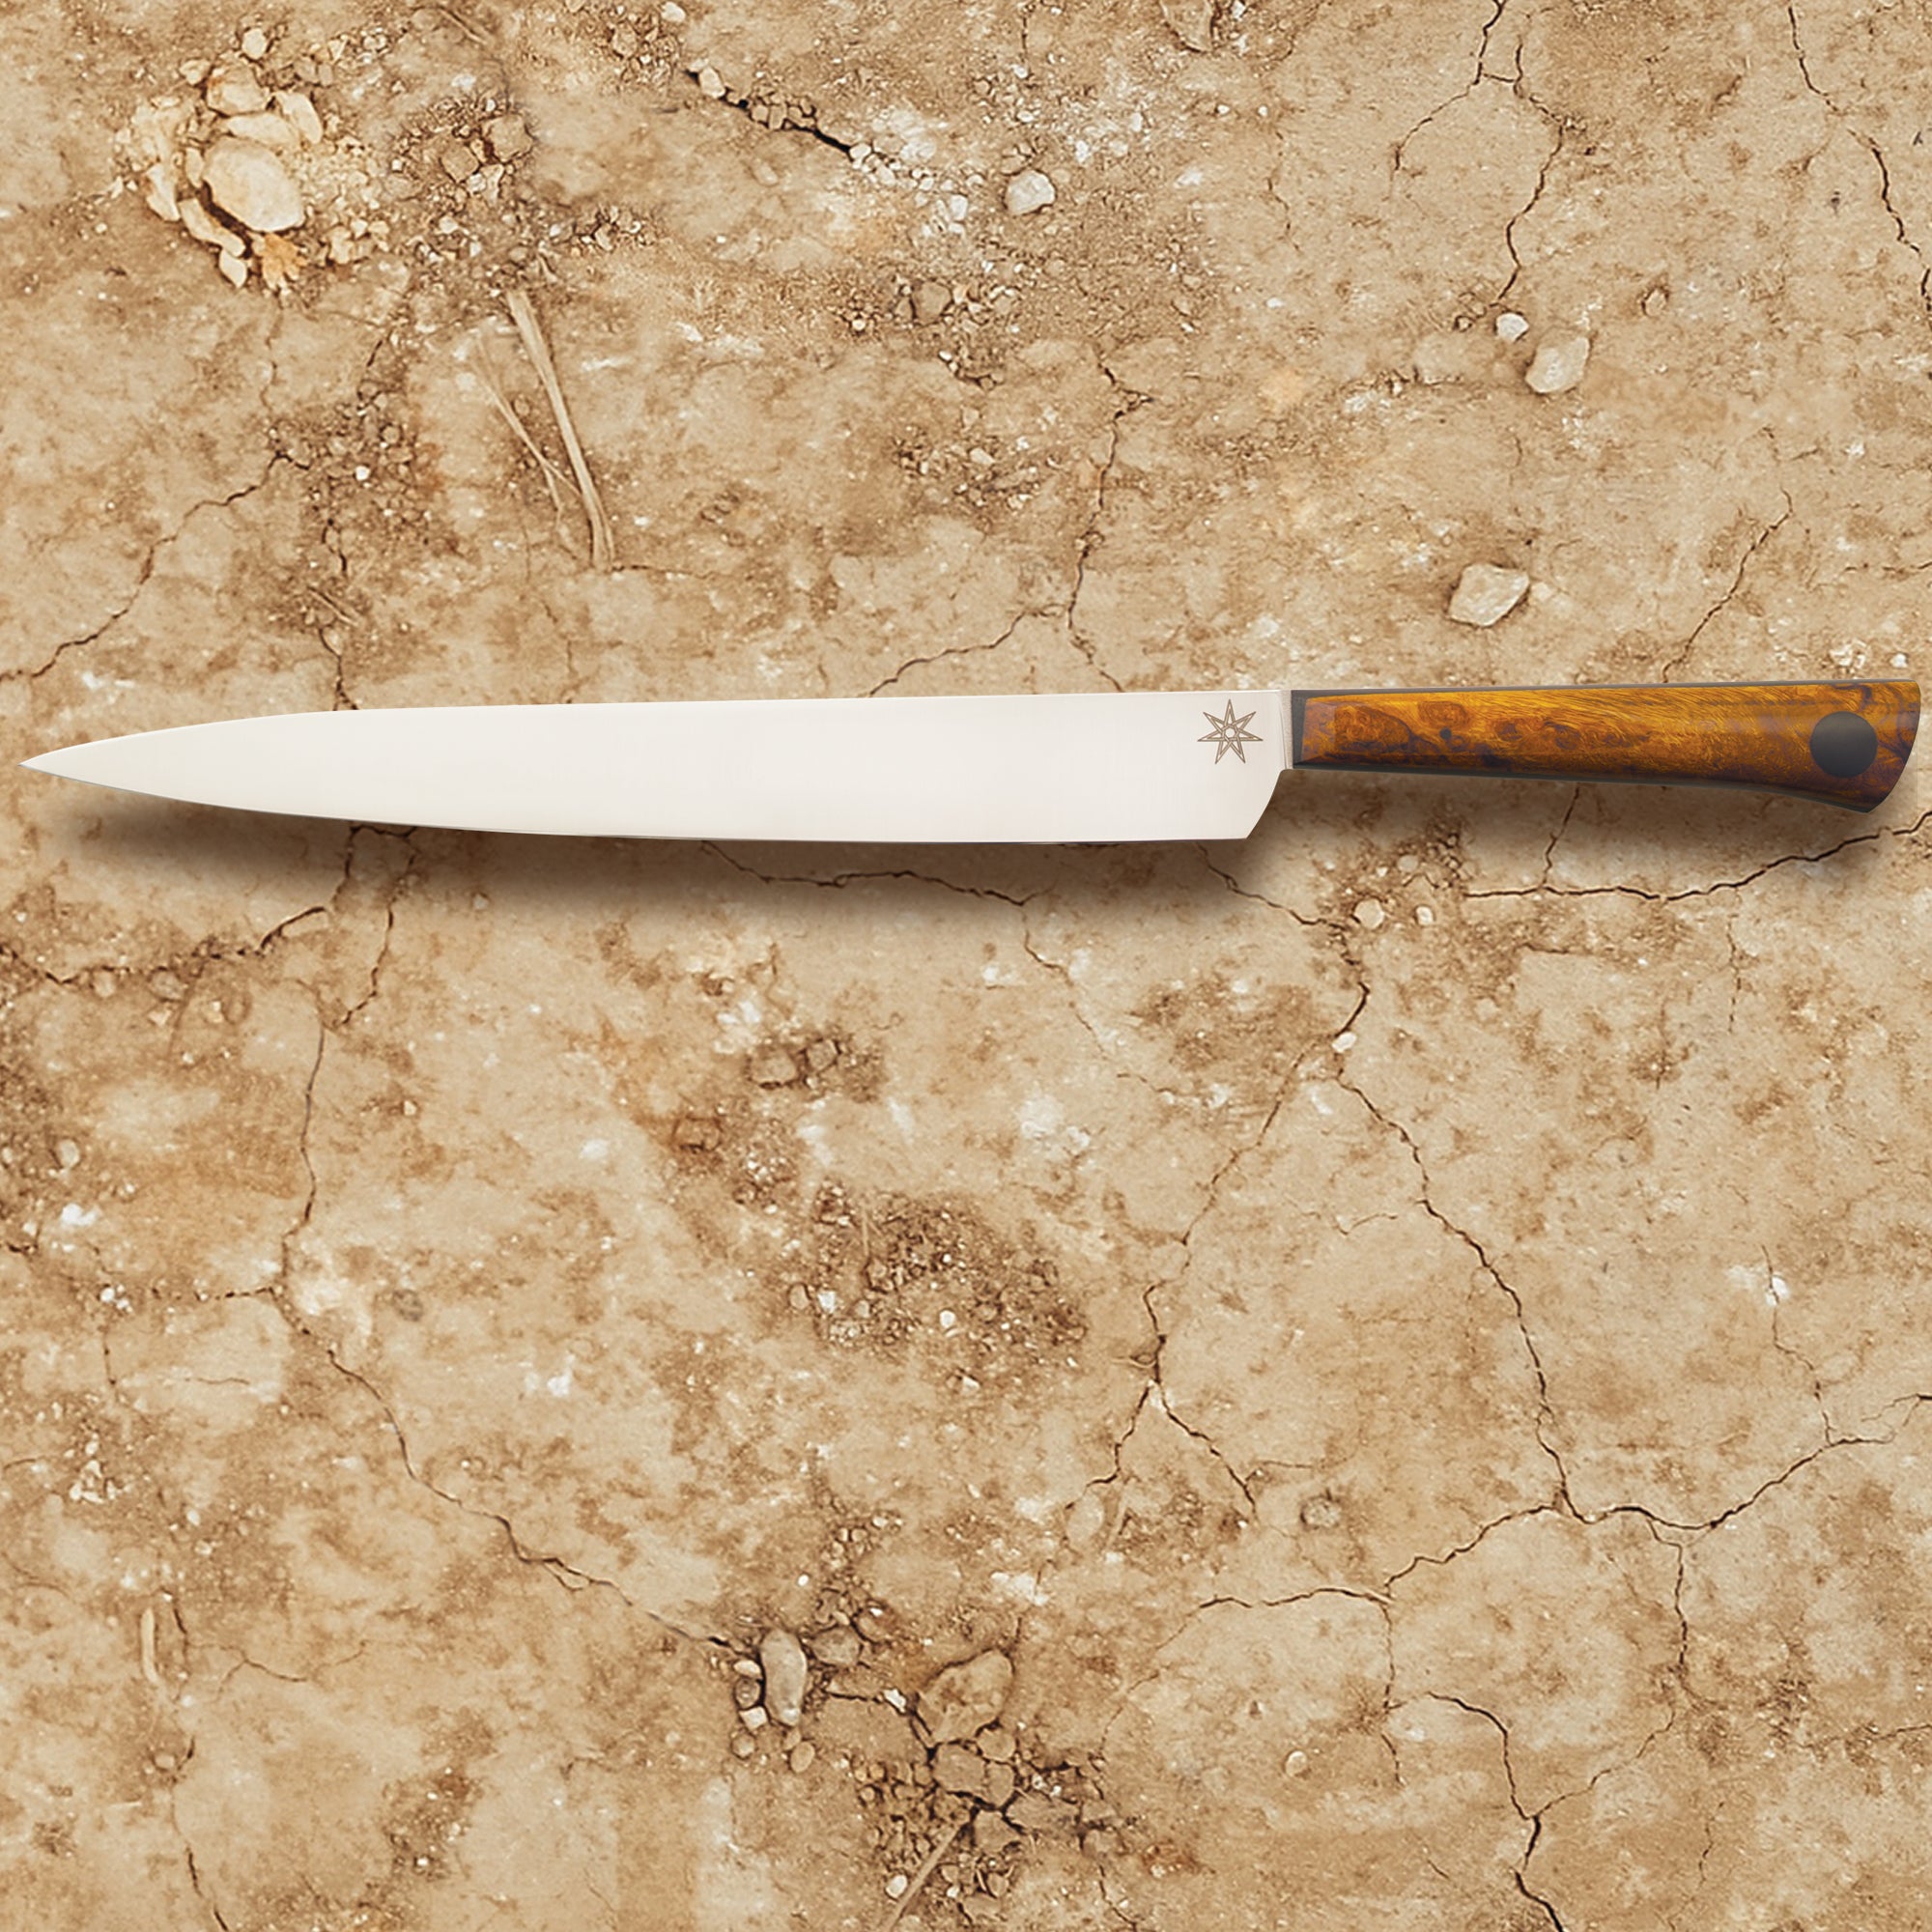 10" slicer carving knife with wood handle. Desert ironwood knife handle and Nitro-V stainless steel blade.